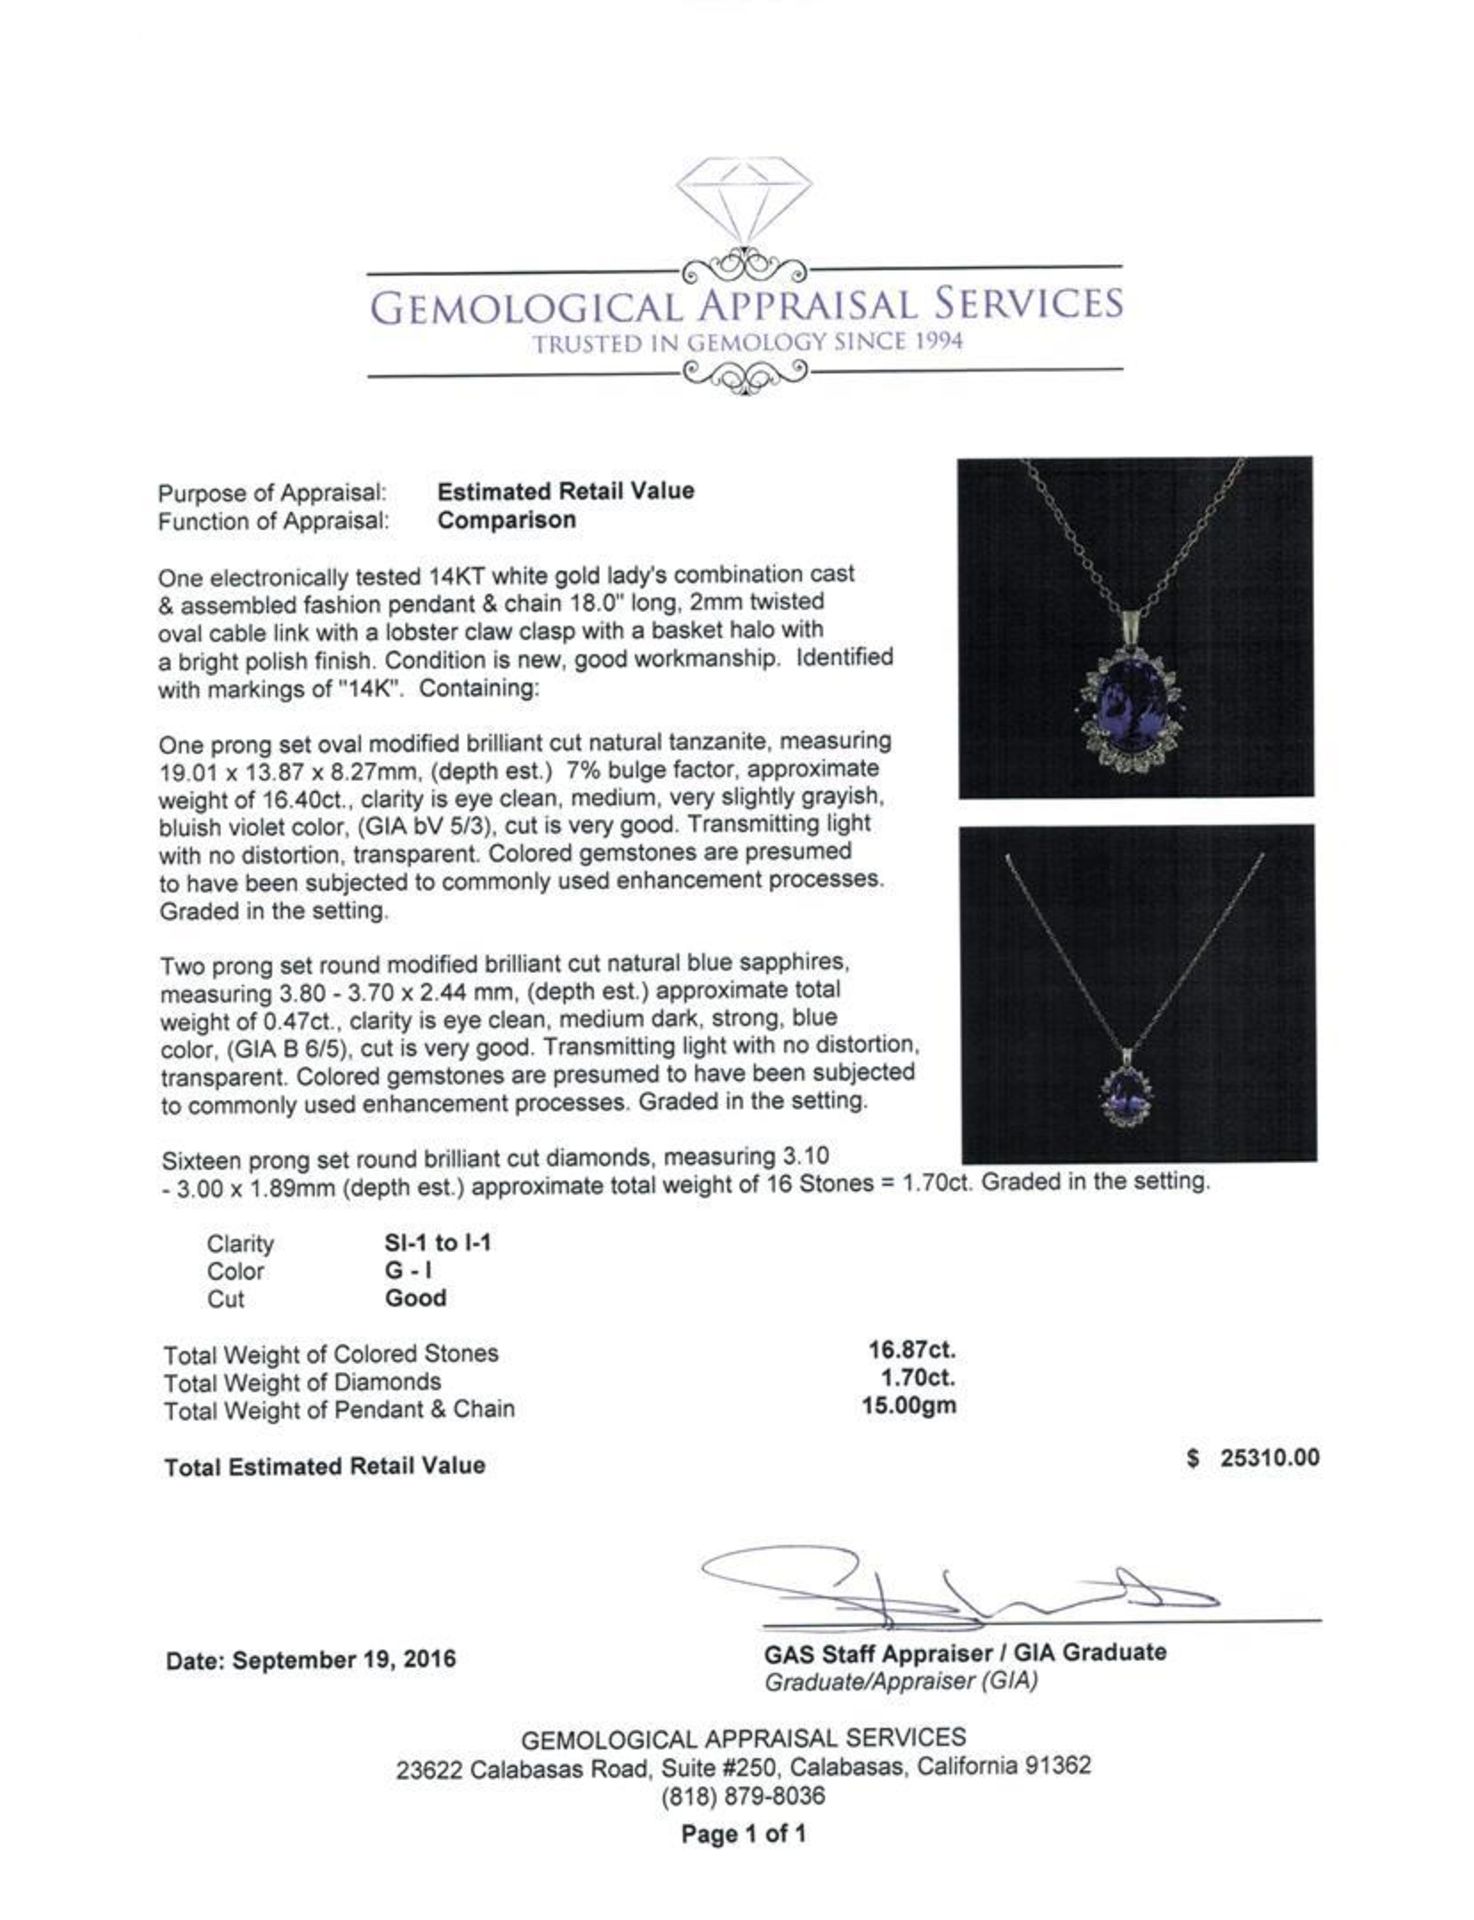 16.40 ctw Tanzanite, Sapphire, and Diamond Pendant With Chain - 14KT White Gold - Image 3 of 3